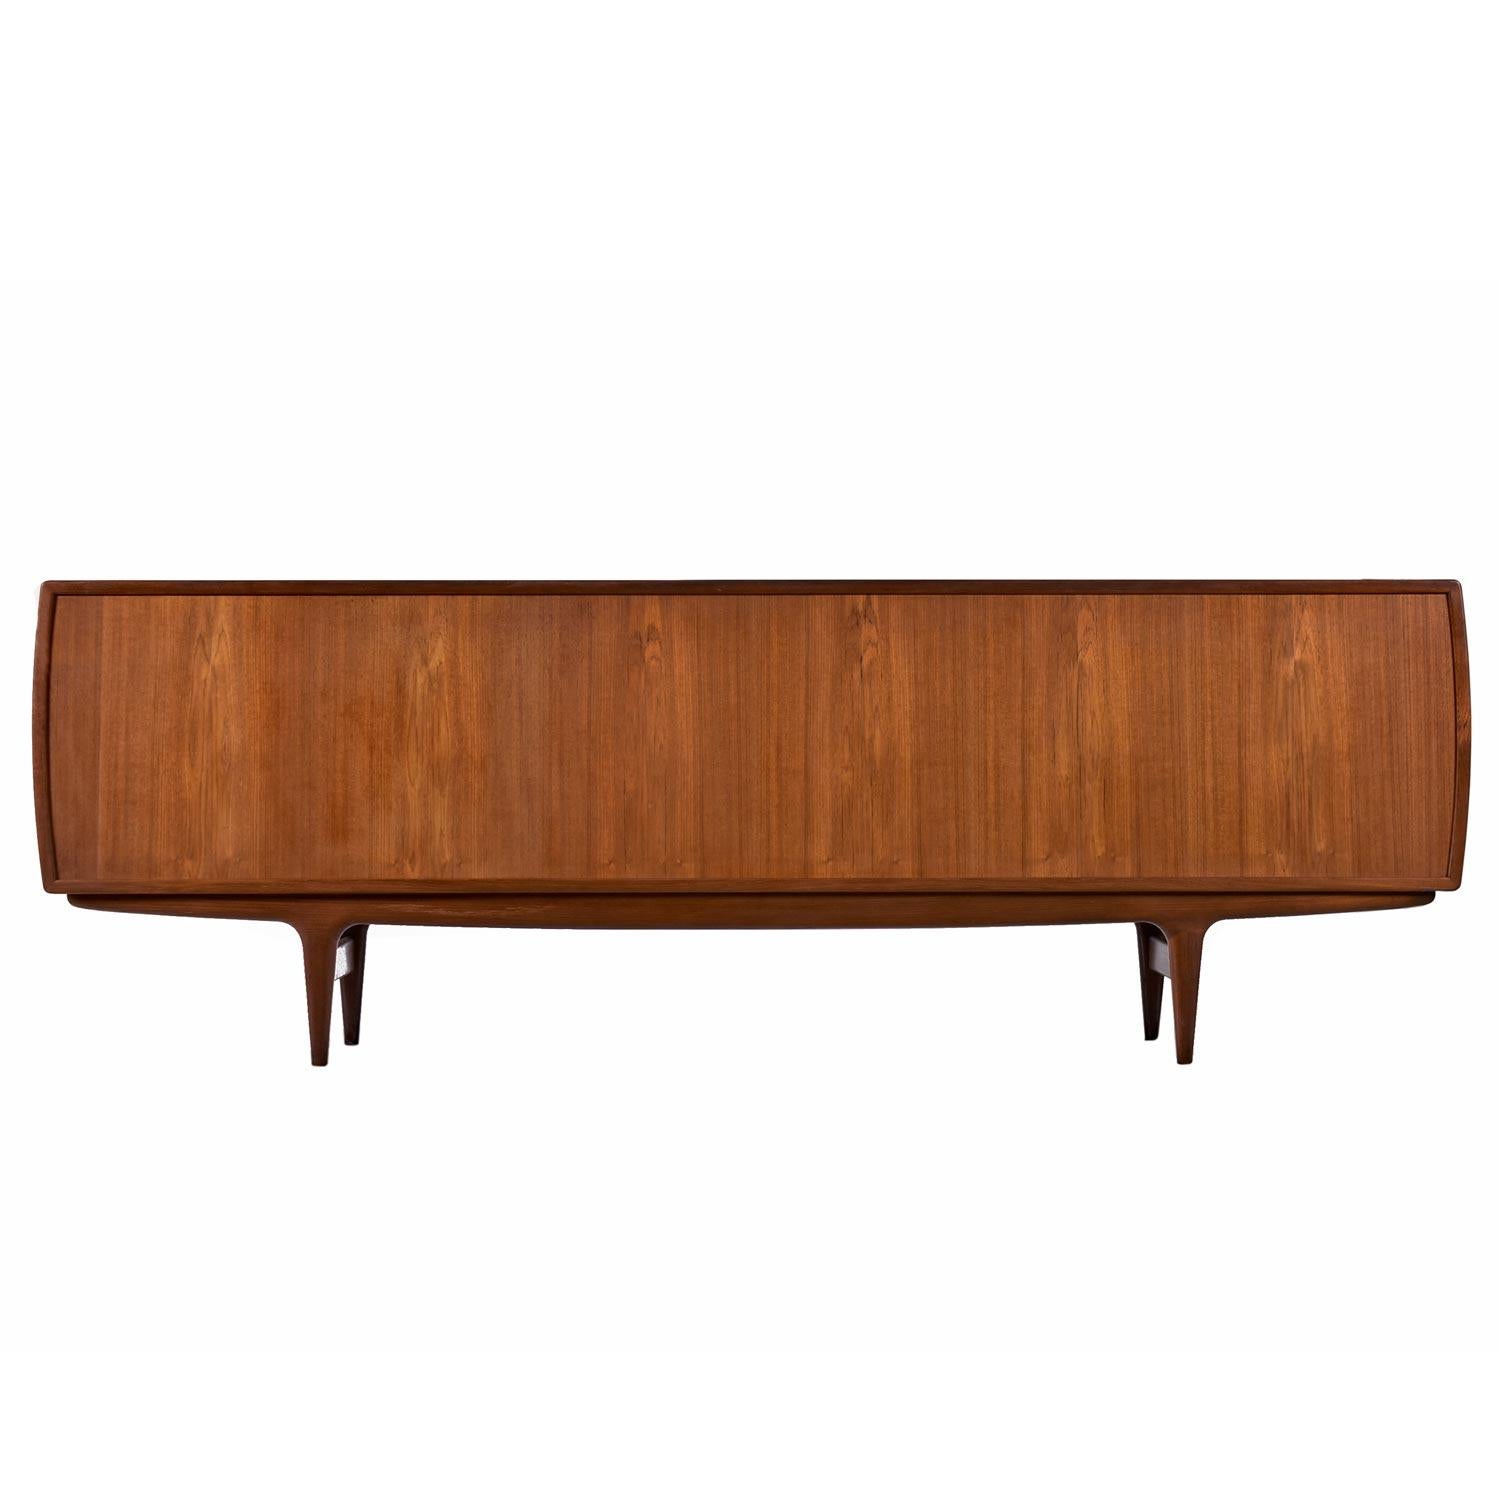 Johannes Andersen for Uldum Møbelfabrik Model-19 credenza restored to excellent condition. This stunning mid-century sideboard is a mix of solid teak and teak veneer over hardwood. Captivating from every direction and completely finished on the back